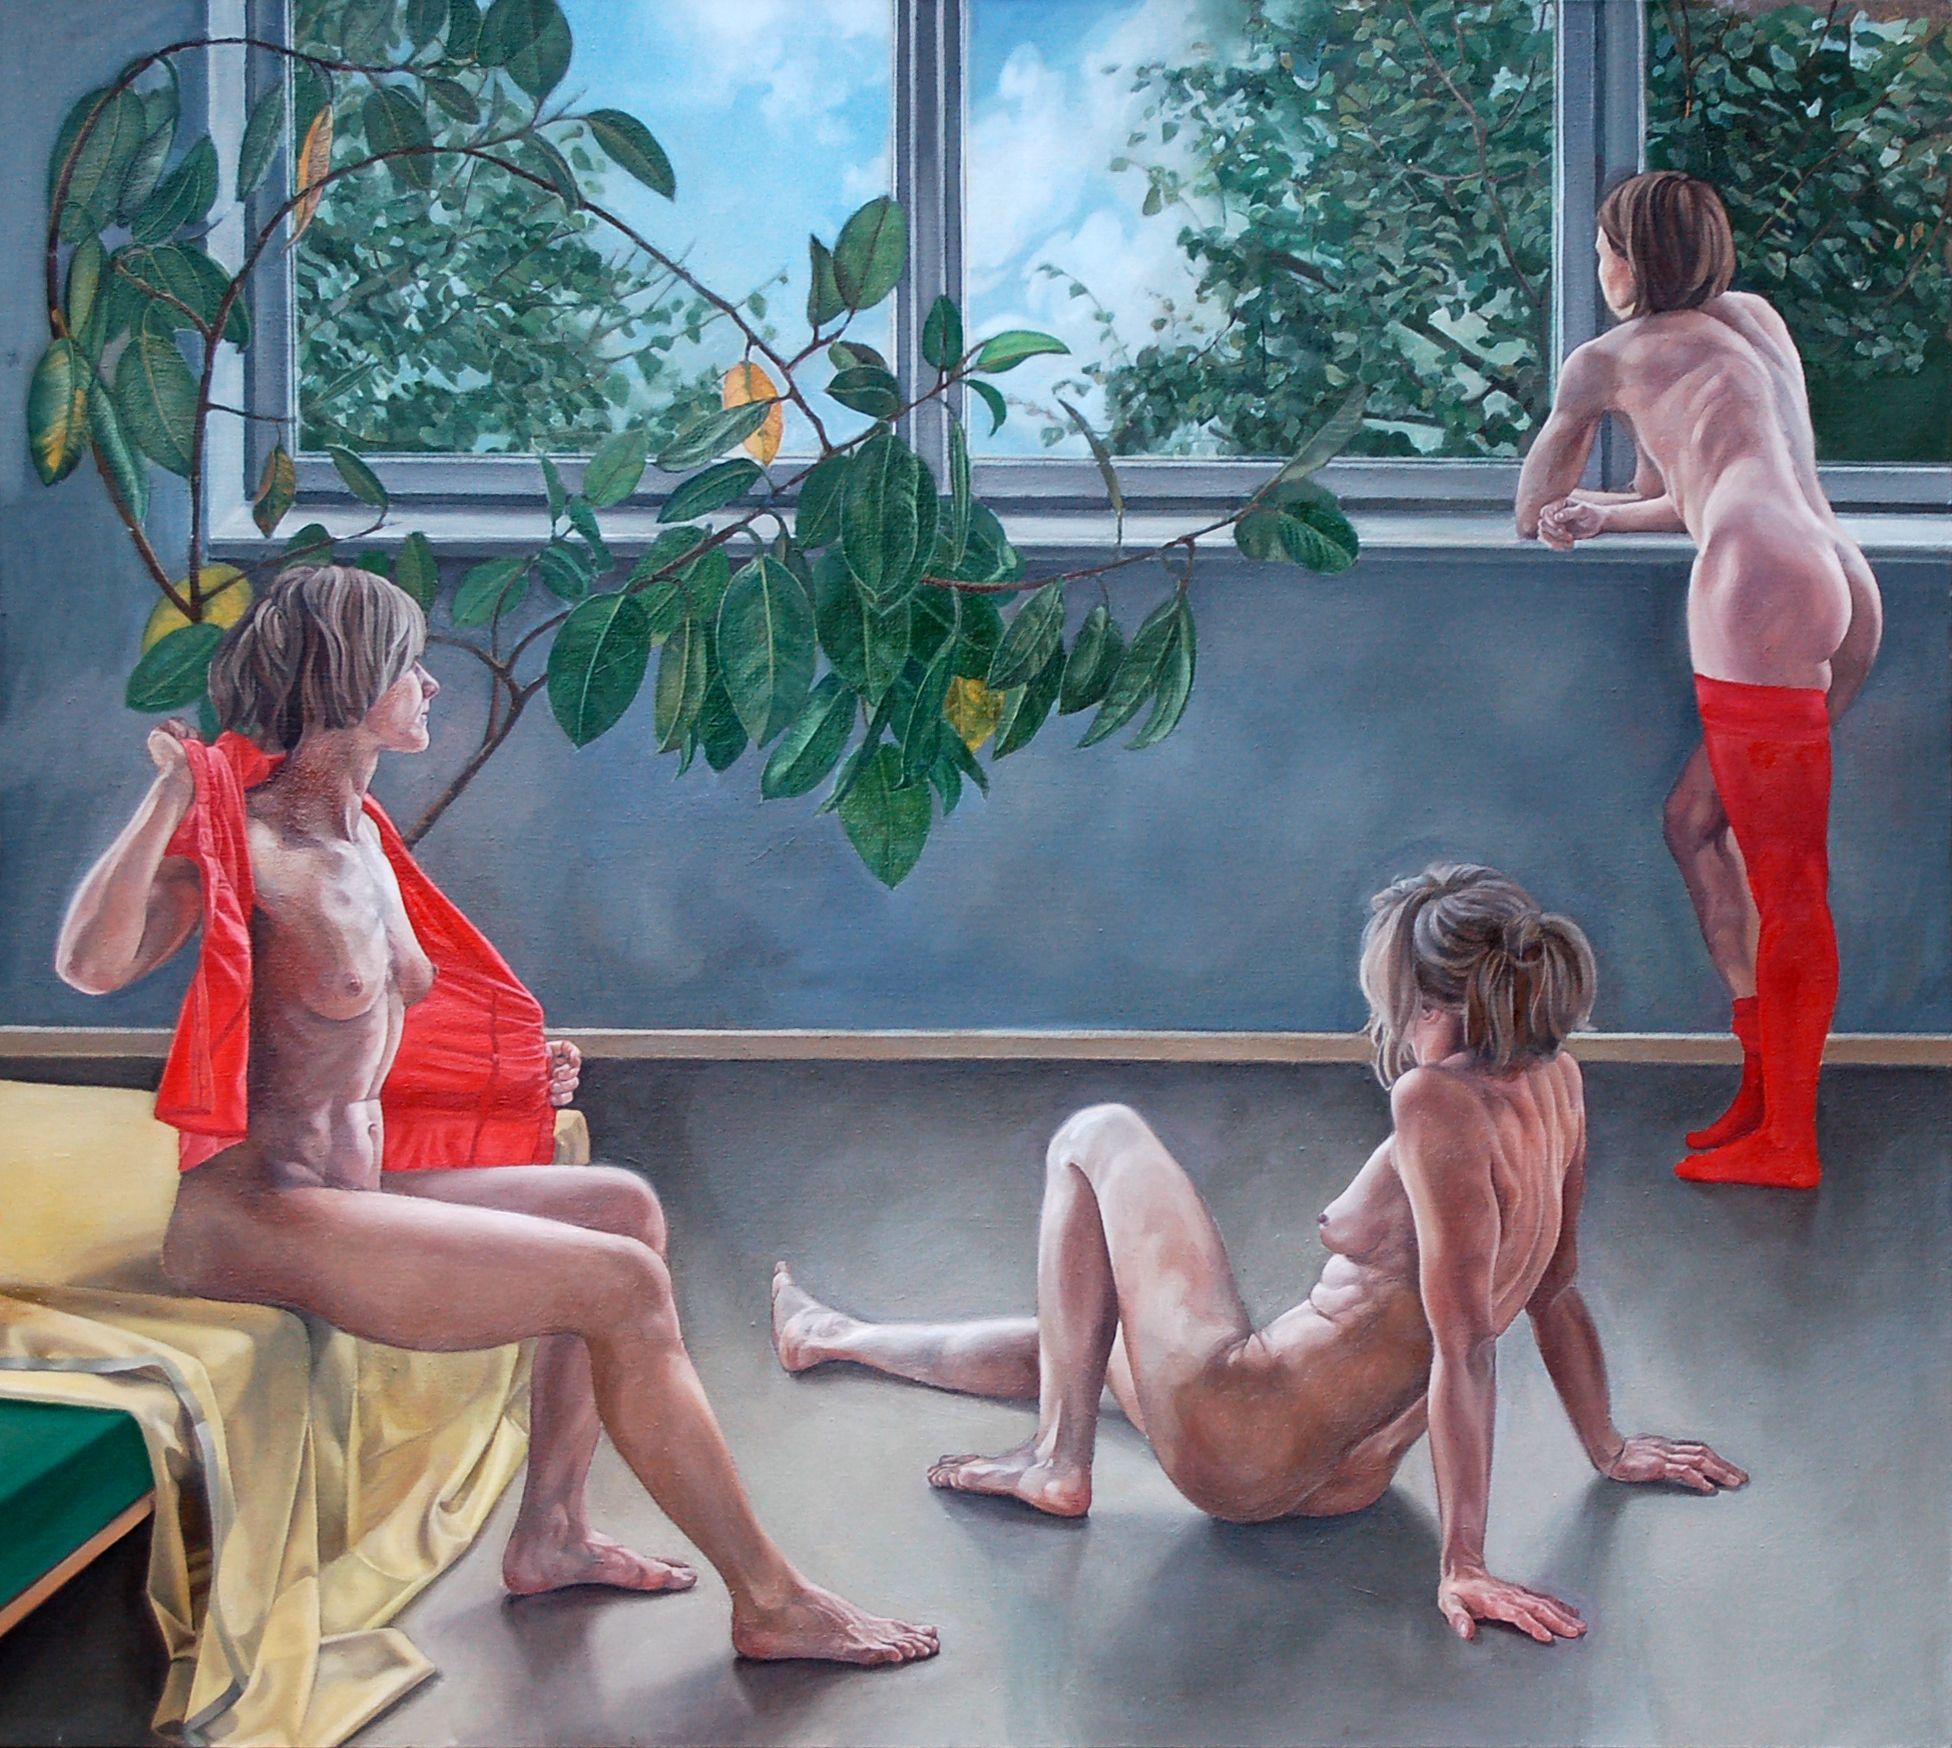 Roman Rembovsky Figurative Painting - In front of the window 2, Painting, Oil on Canvas